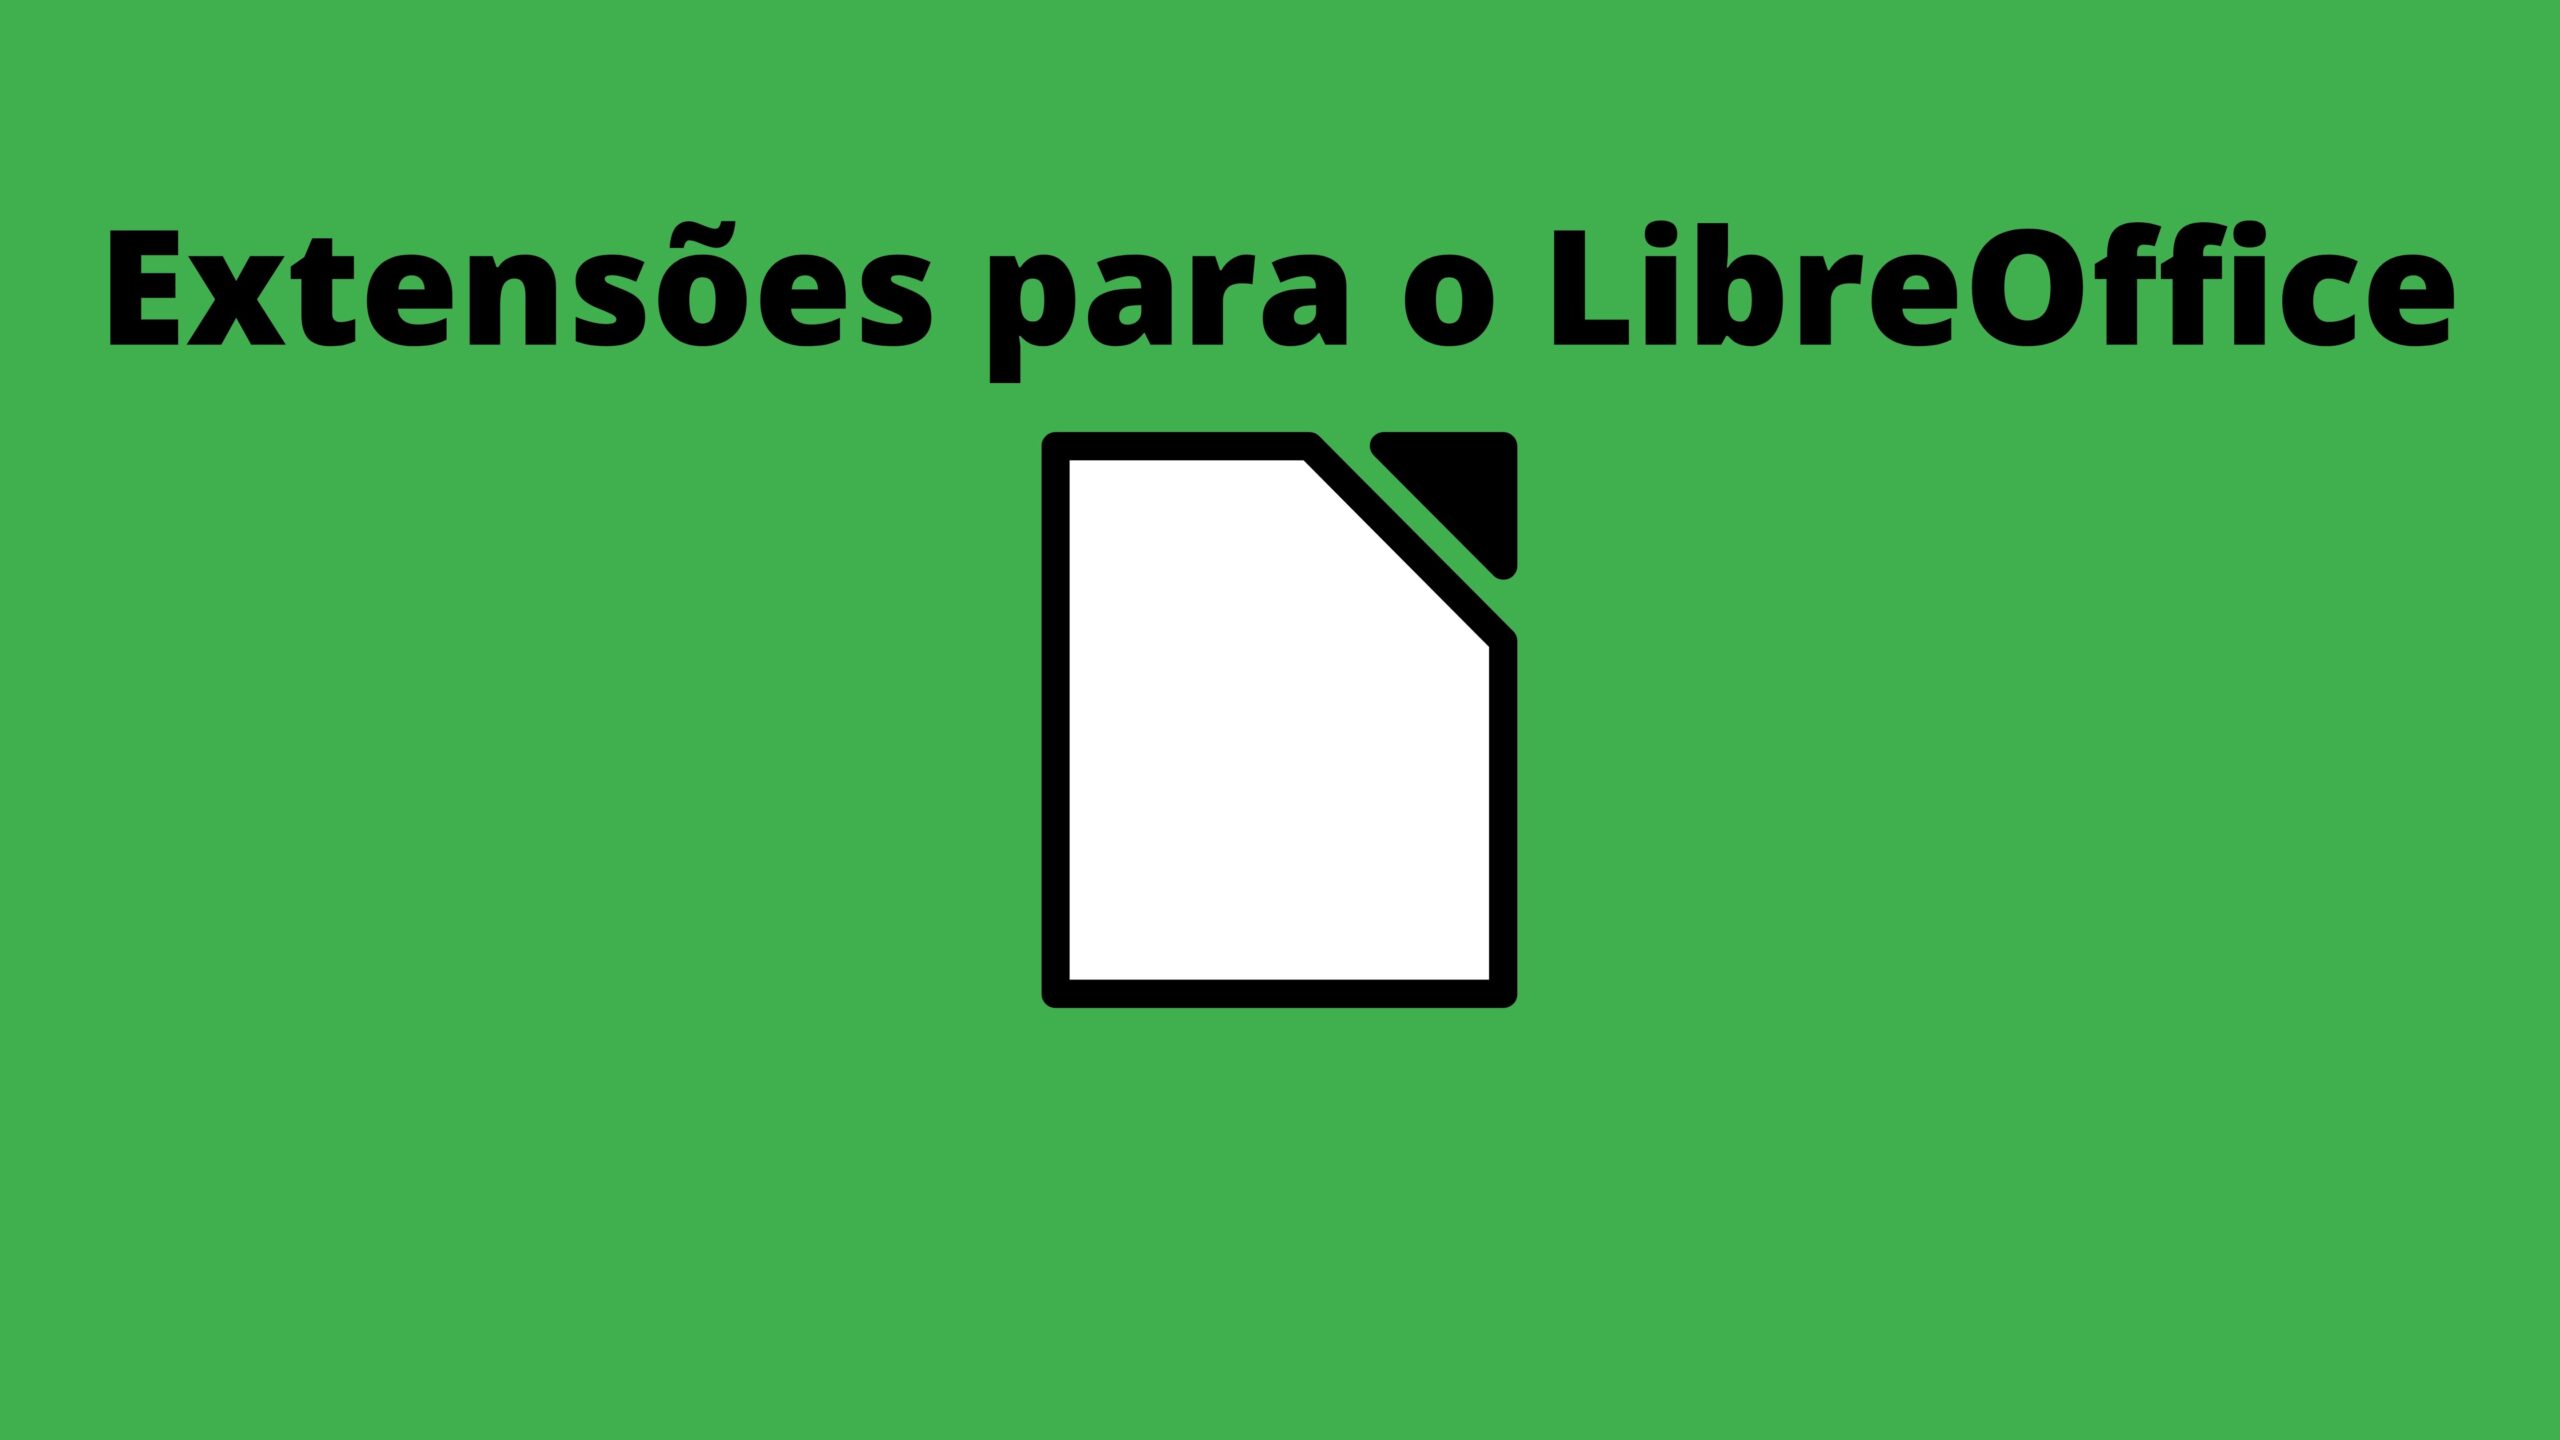 https://pt-br.libreoffice.org/descubra/templates-and-extensions/